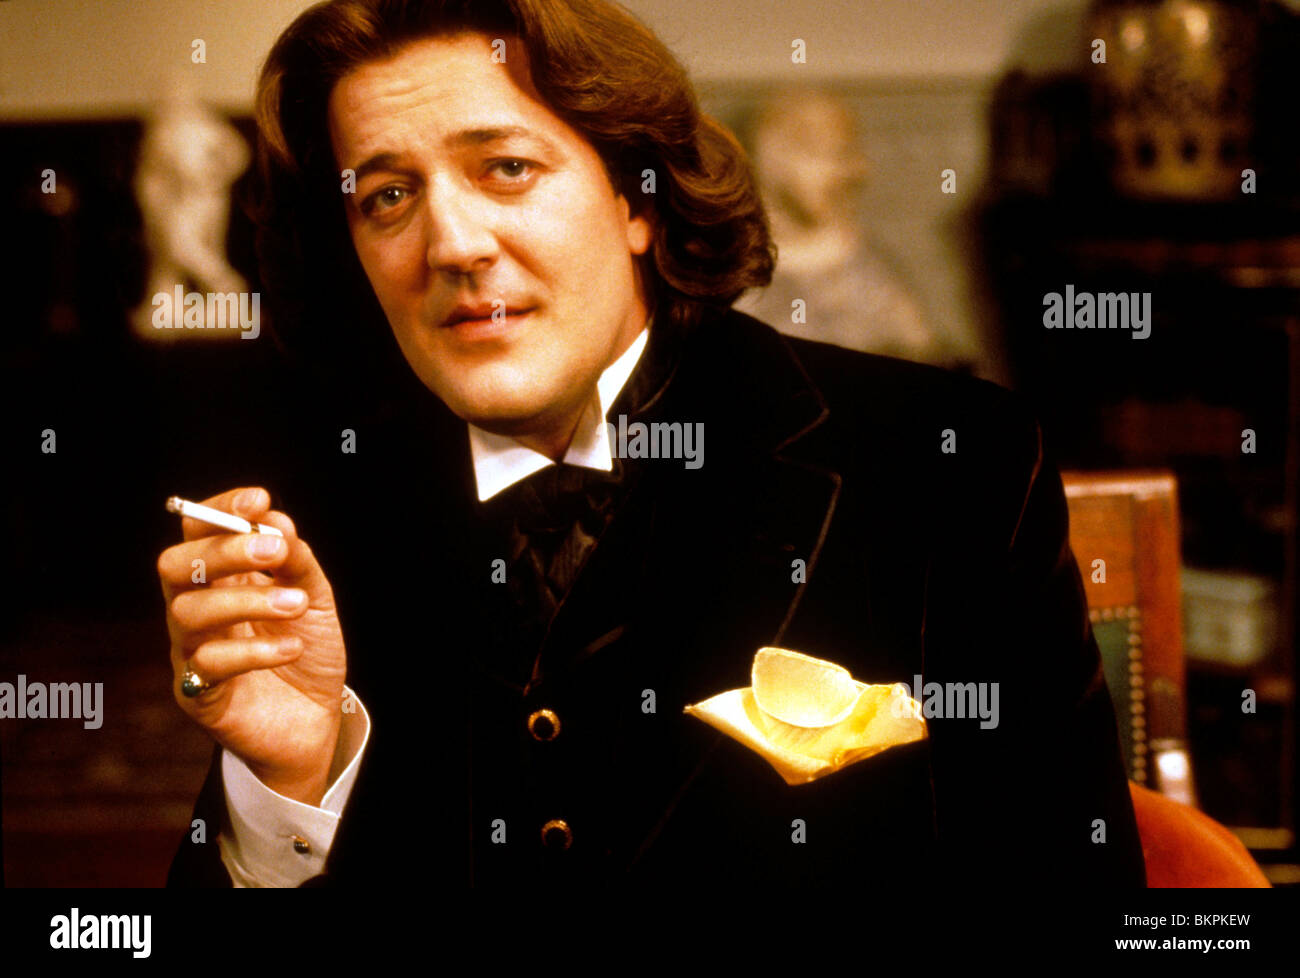 WILDE -1997 STEPHEN FRY Banque D'Images